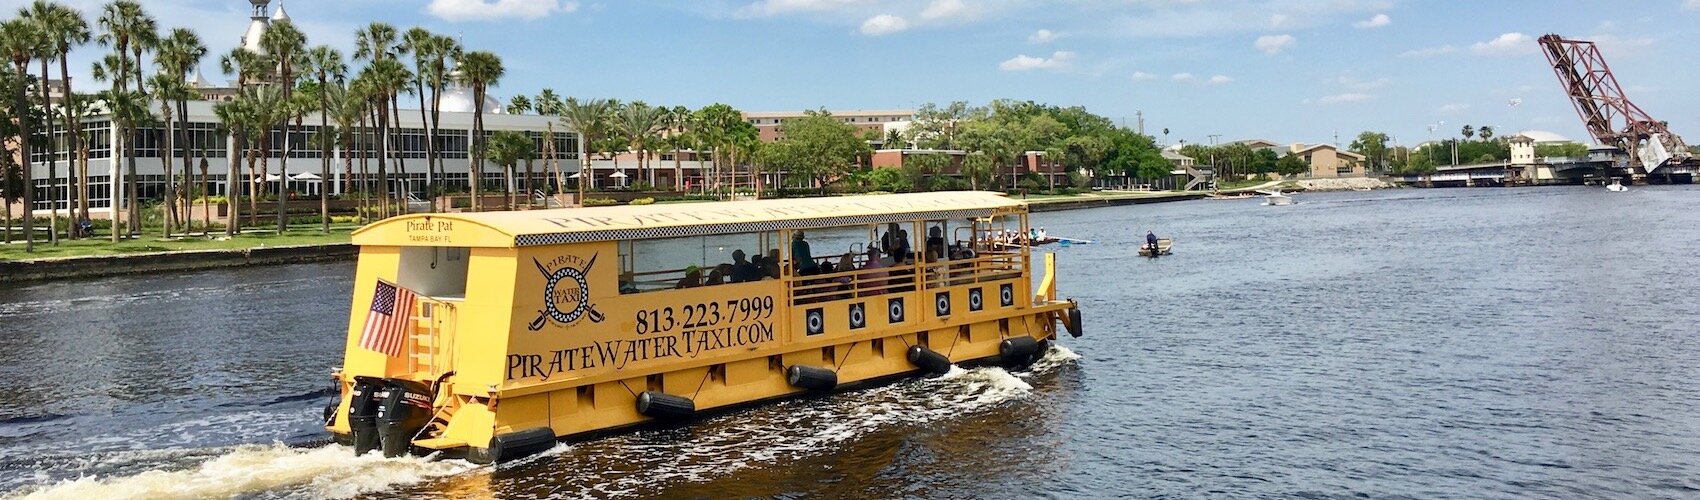 Tampa's Pirate Water Taxi adds boats, more options for rides